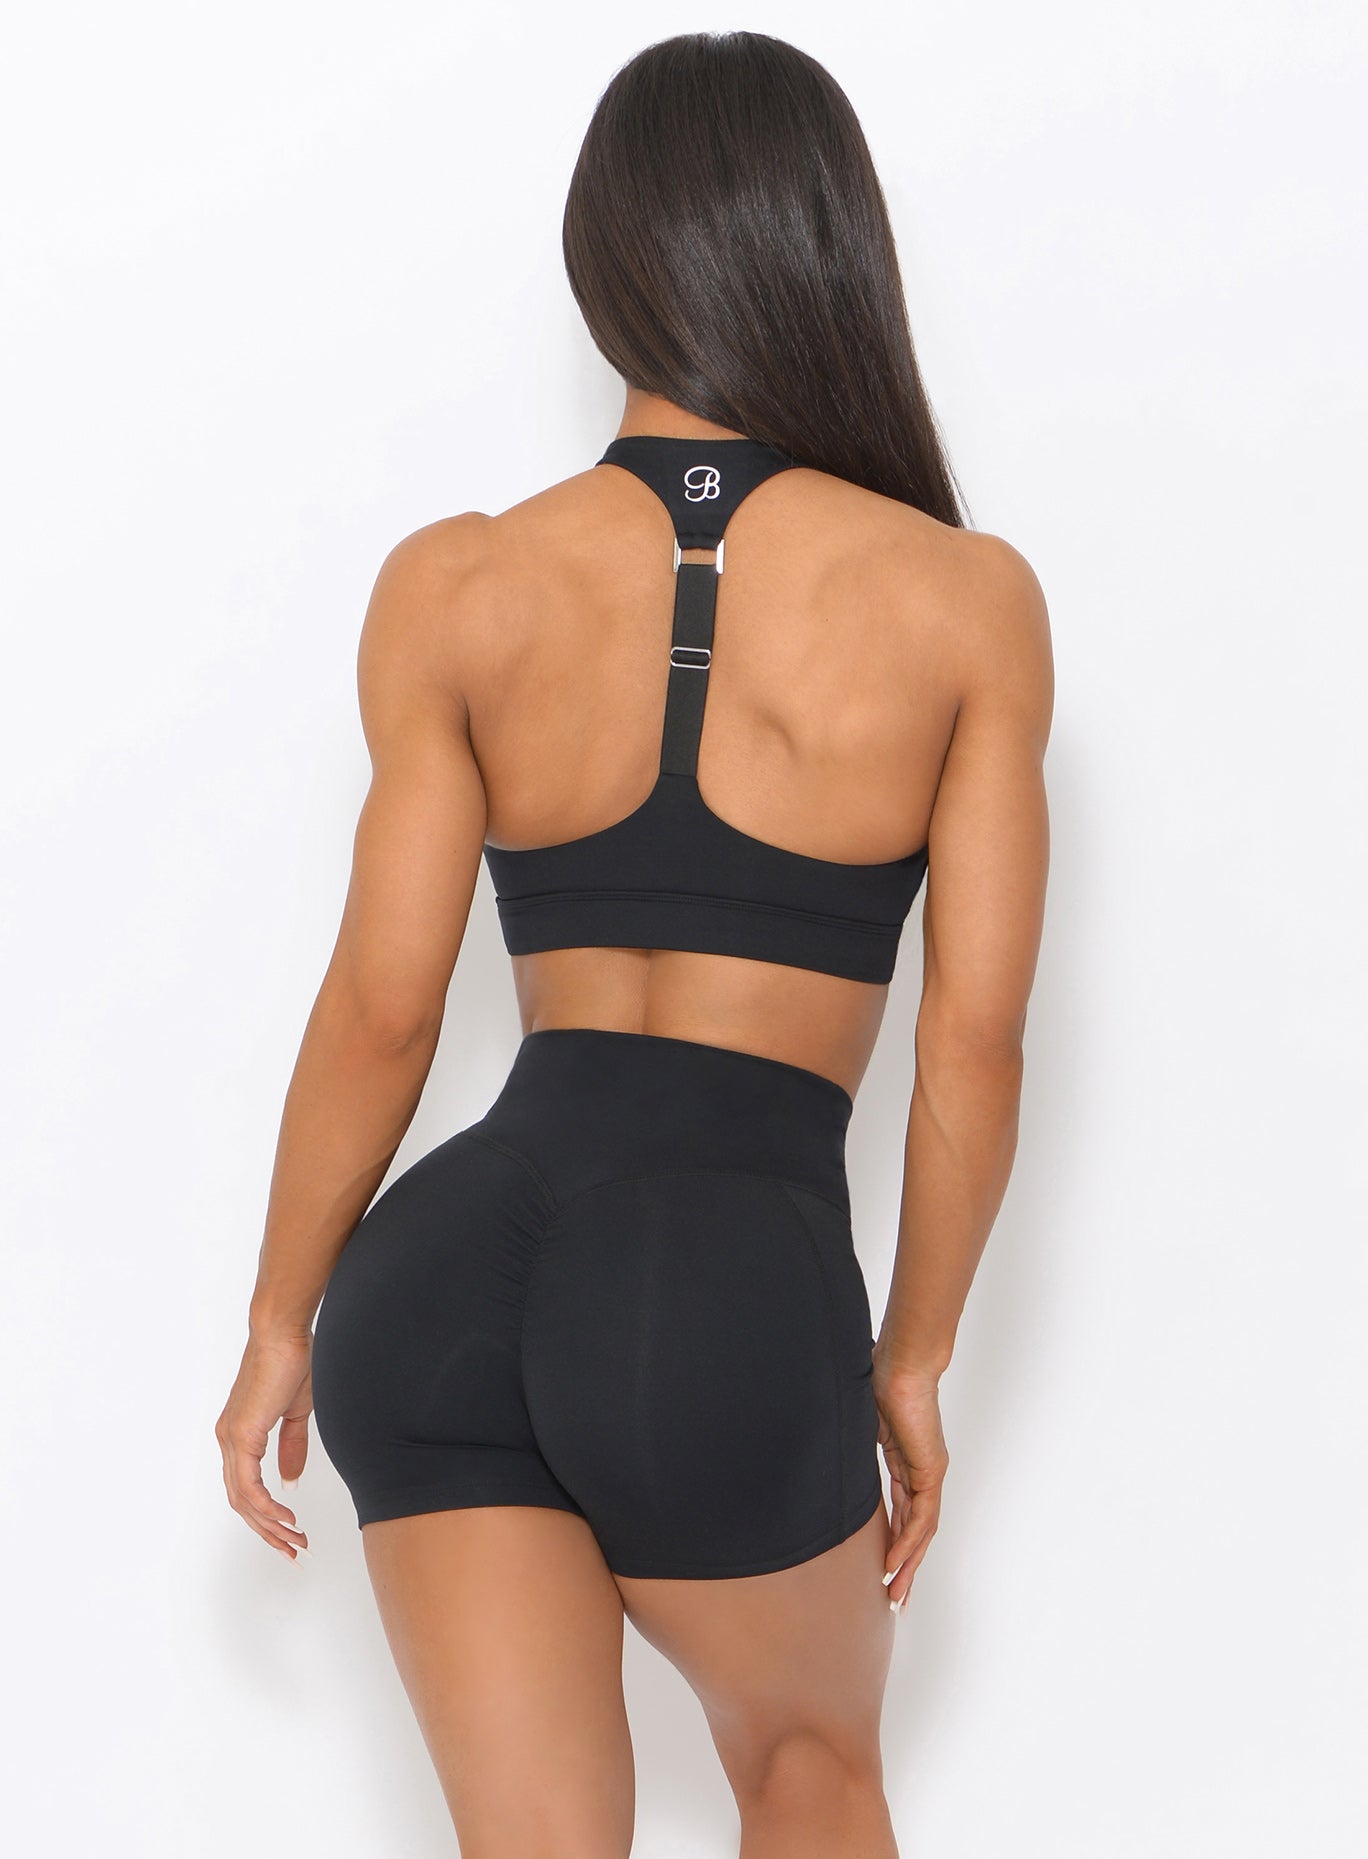 Back view of the model wearing our black weightlifter bra and a matching shorts